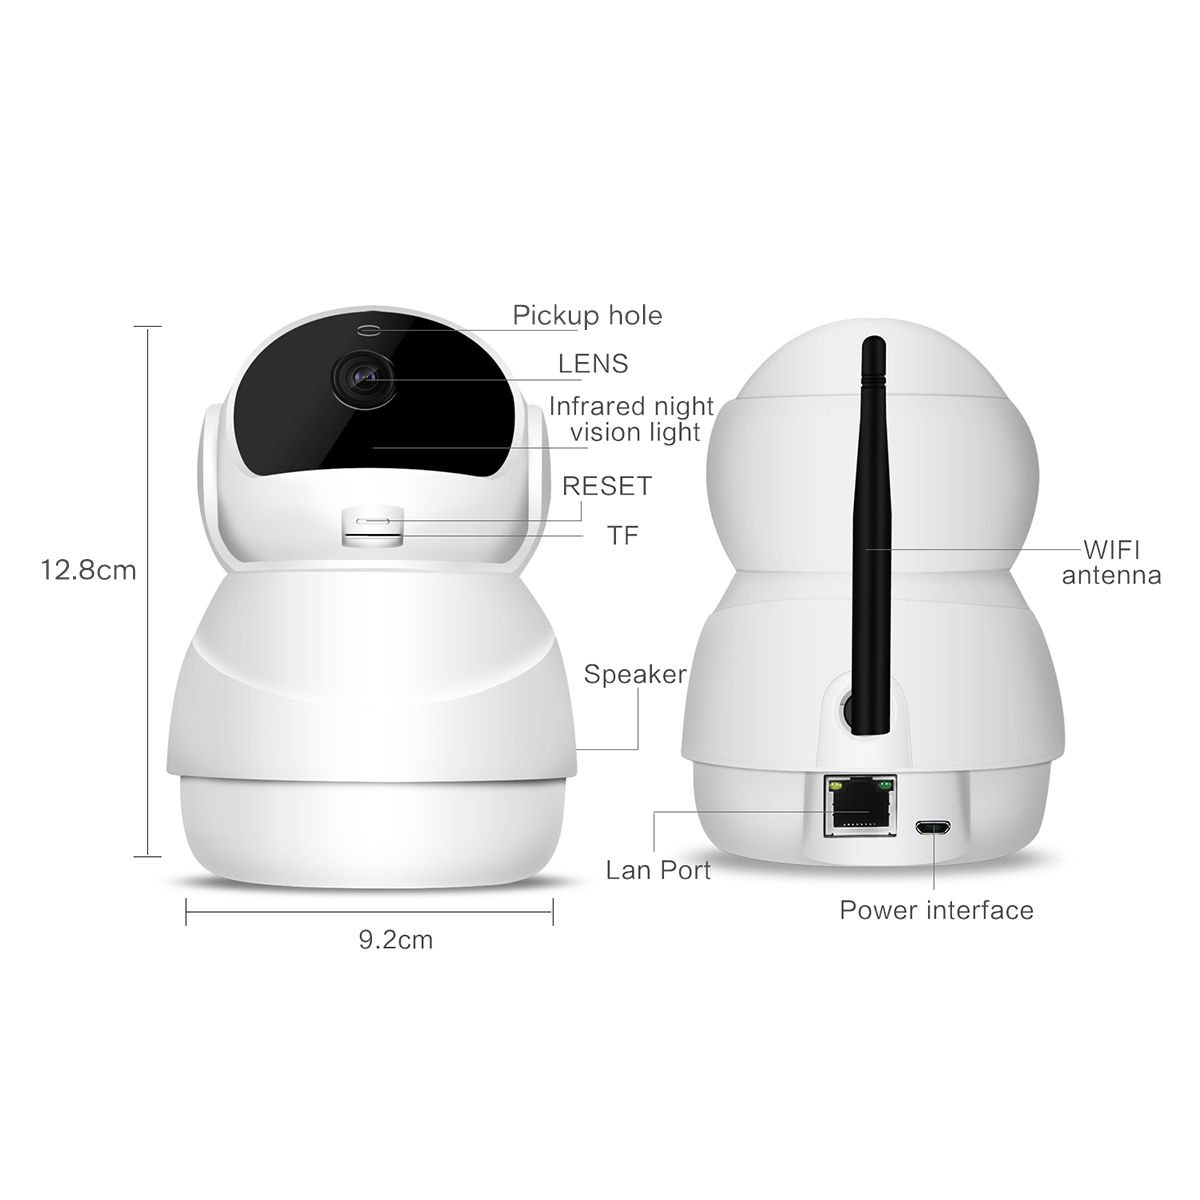 Bakeey 1080P 360 Degree Smart WIFI IP Camera Support Two-way Audio PIR Motion Sensor 4 x Zoom TF Card Storage Baby Monitor 11